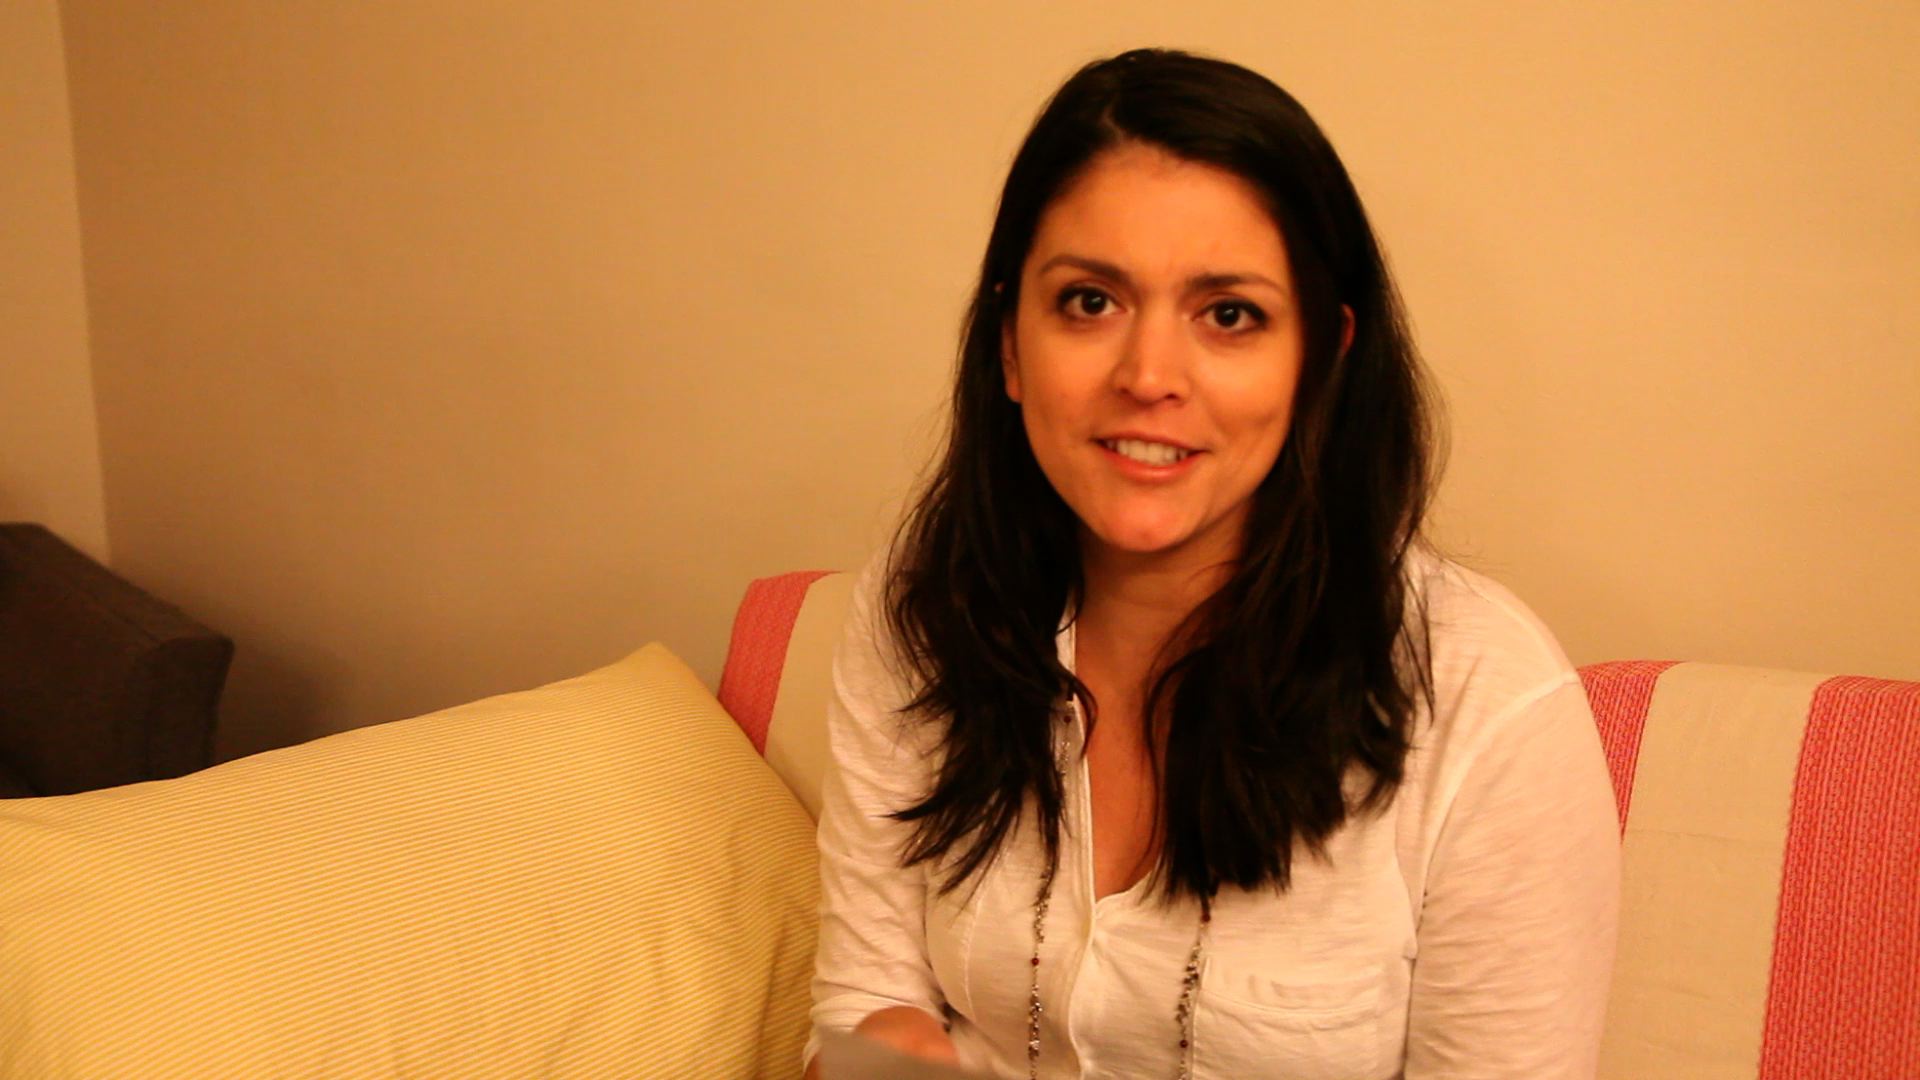 Watch Saturday Night Live Web Exclusive Asksnl With Cecily Strong